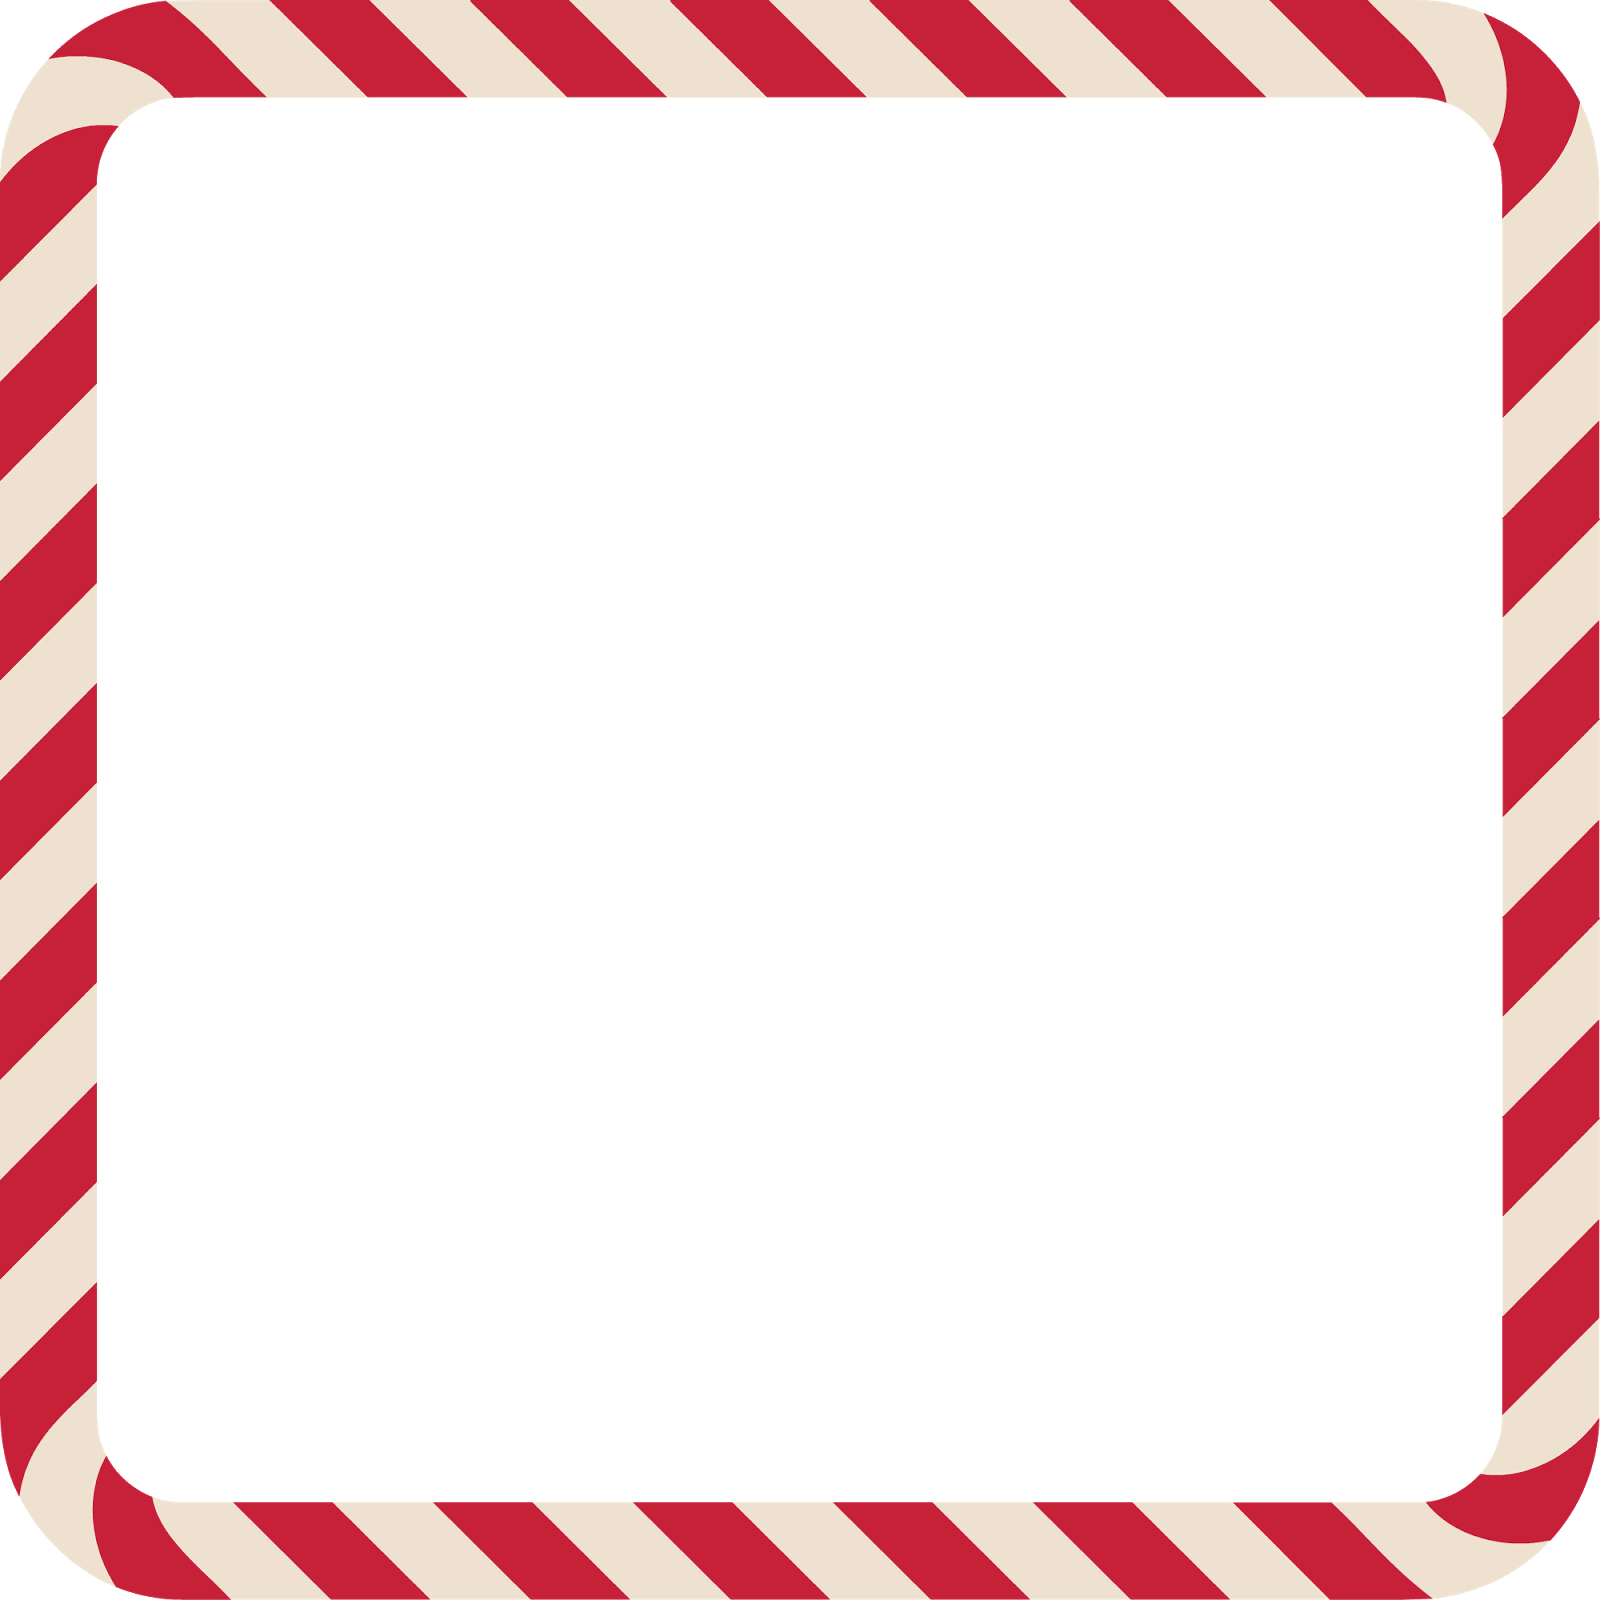 Picture Freeuse Stock Candy Cane Border Clipart - Picture Freeuse Stock Candy Cane Border Clipart (1600x1600)